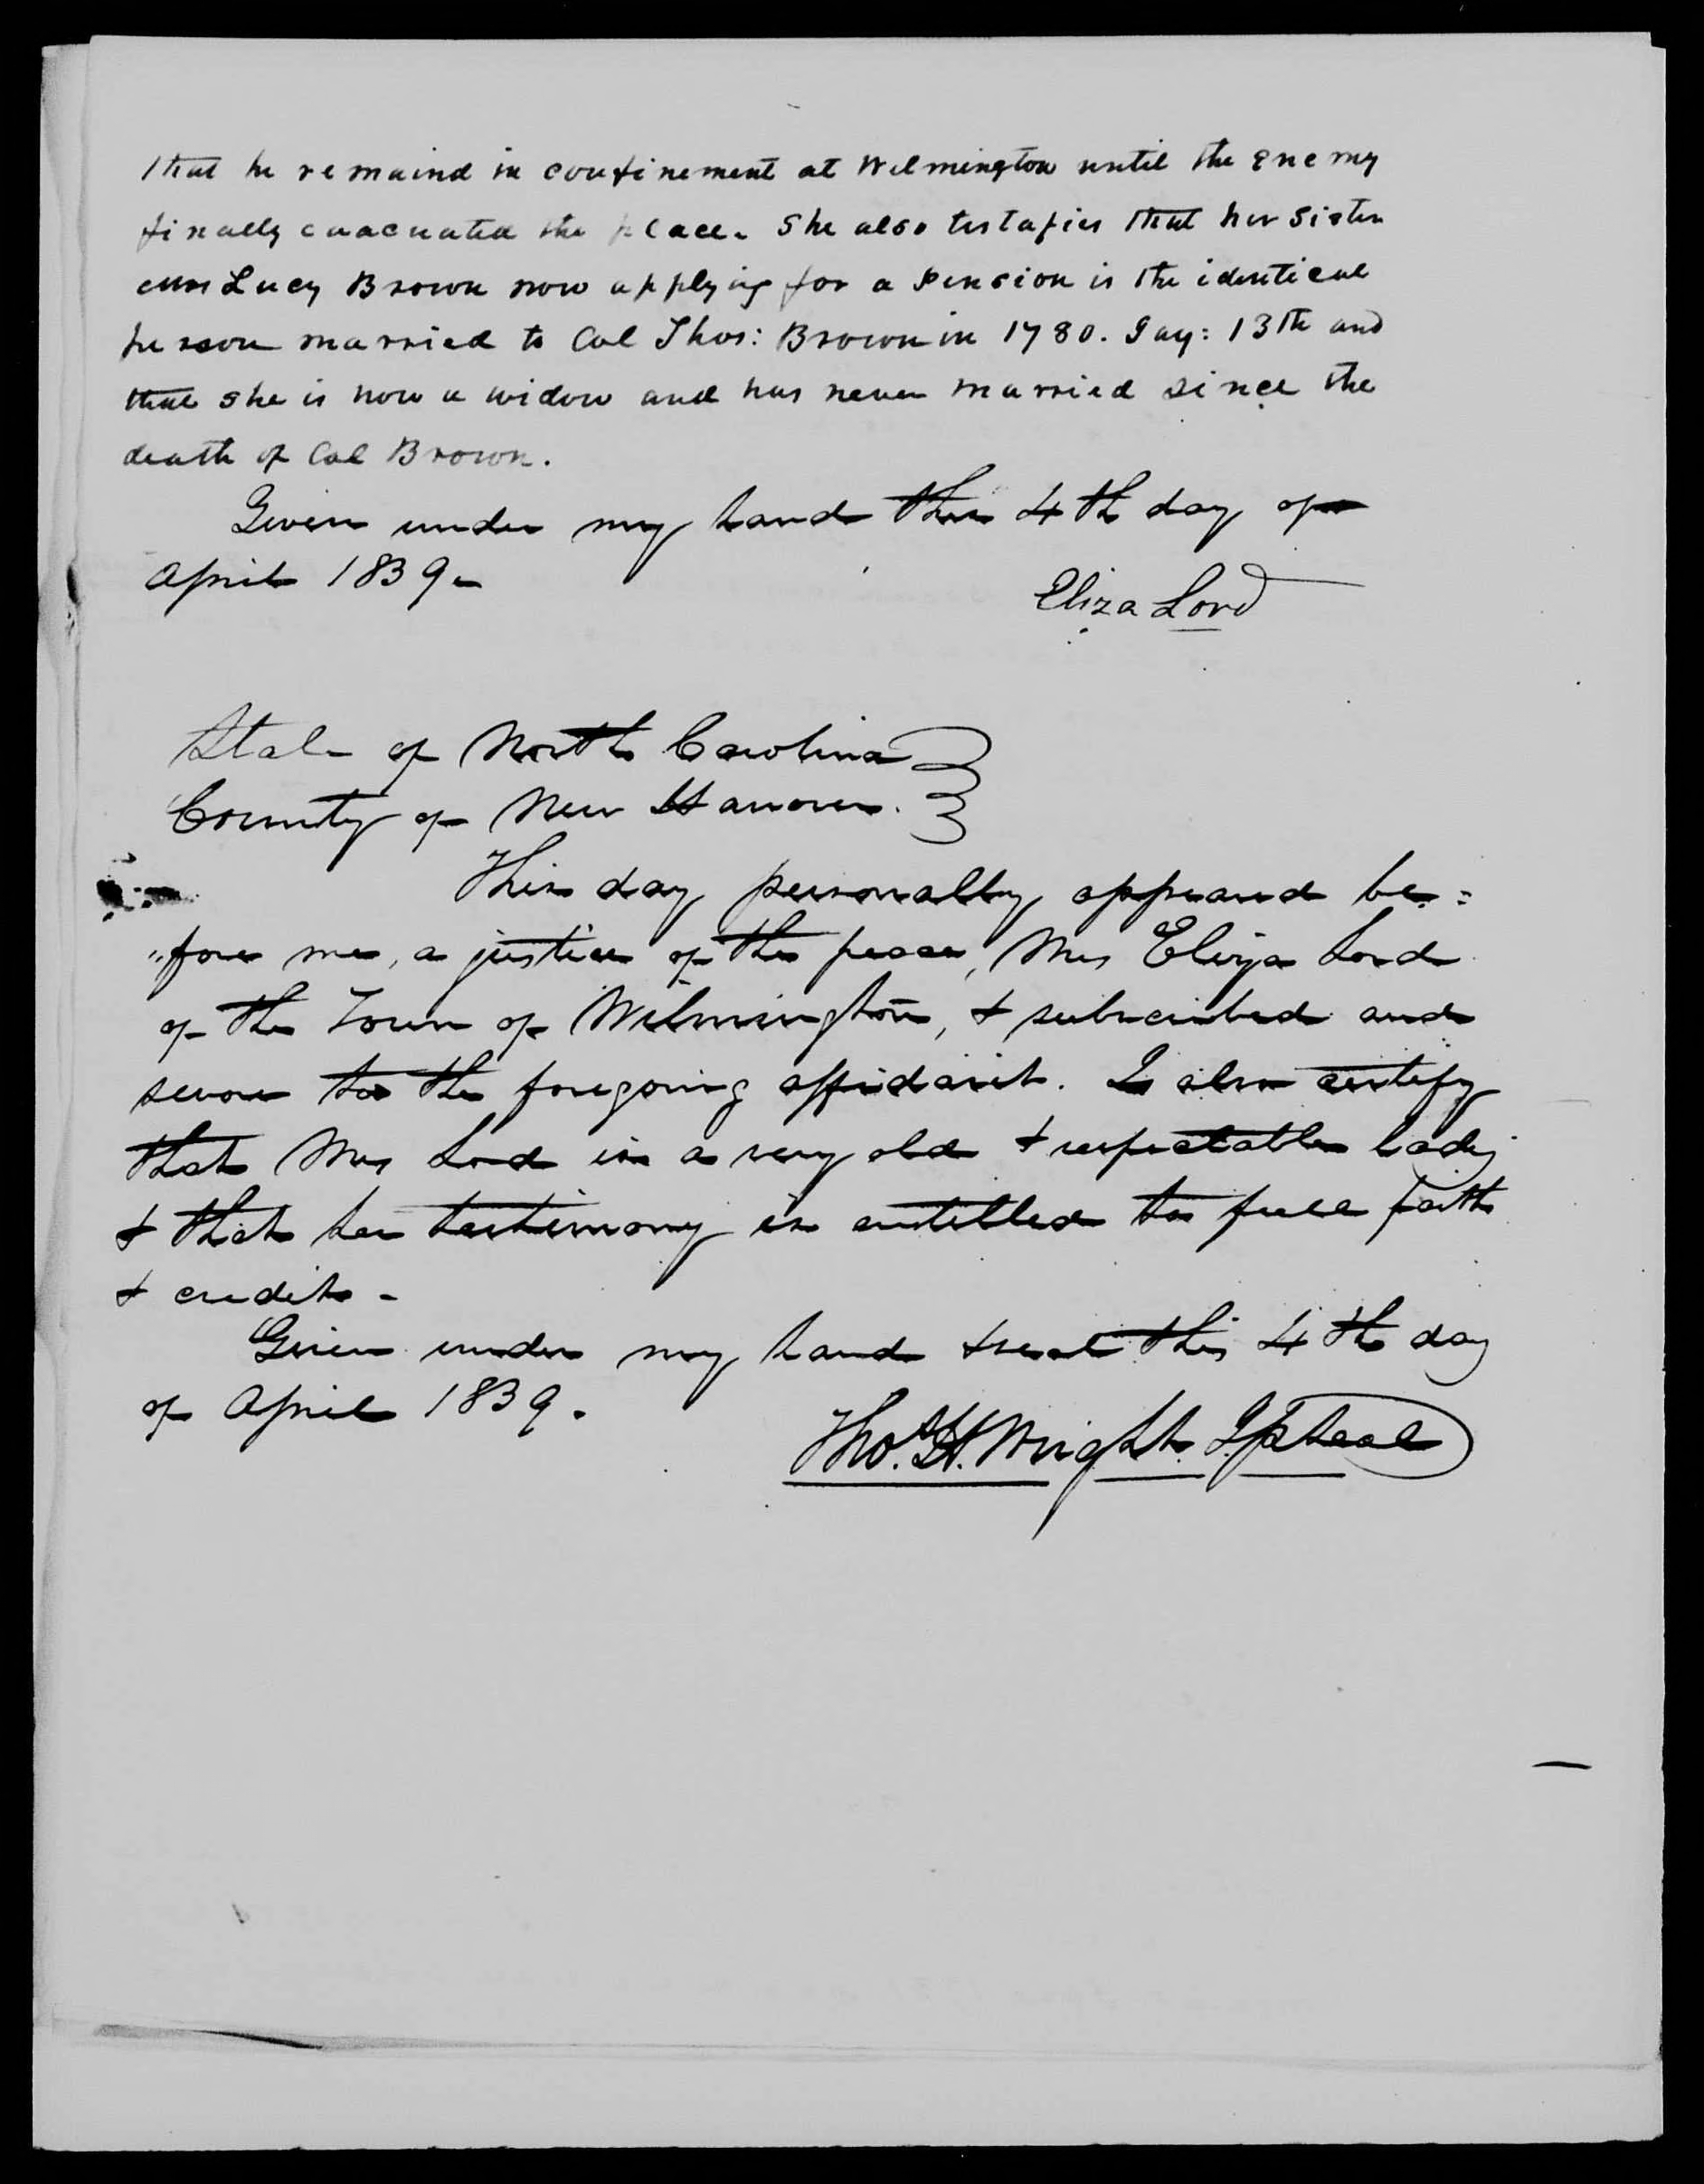 Affidavit of Eliza Lord in support of a Pension Claim for Lucy Brown, 4 April 1839, page 2